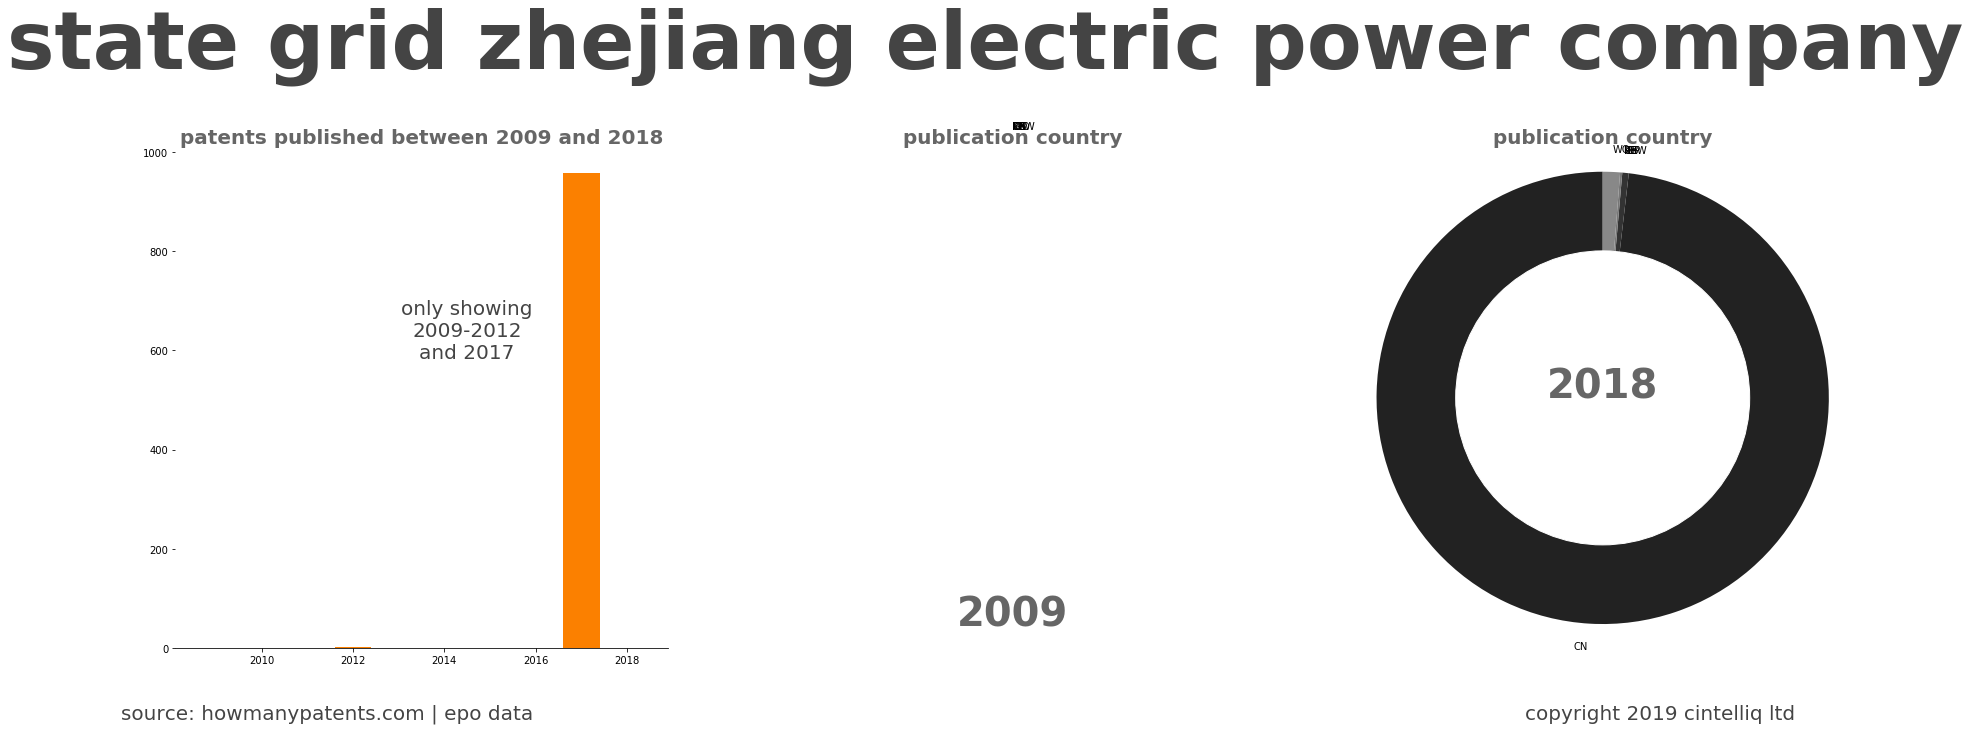 summary of patents for State Grid Zhejiang Electric Power Company